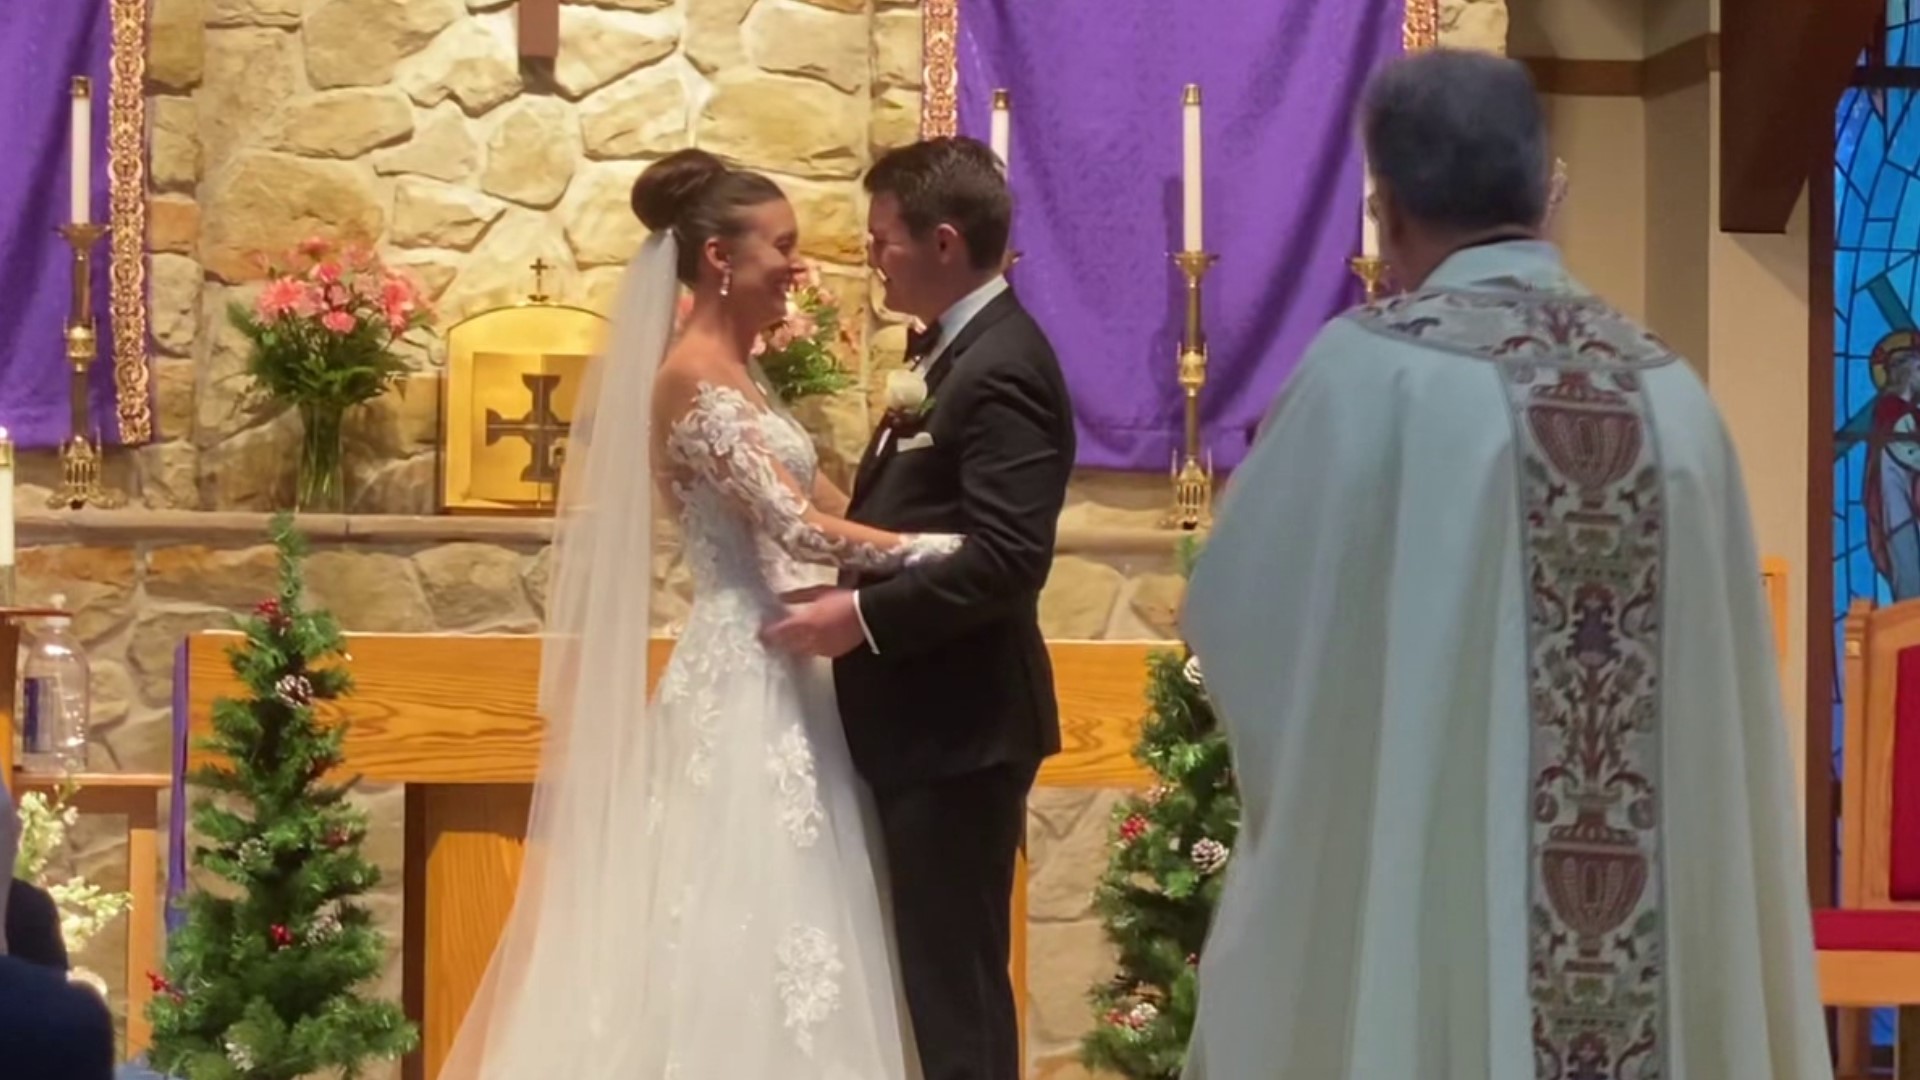 Newswatch 16's own Meteorologist Ally Gallo tied the knot Saturday afternoon.